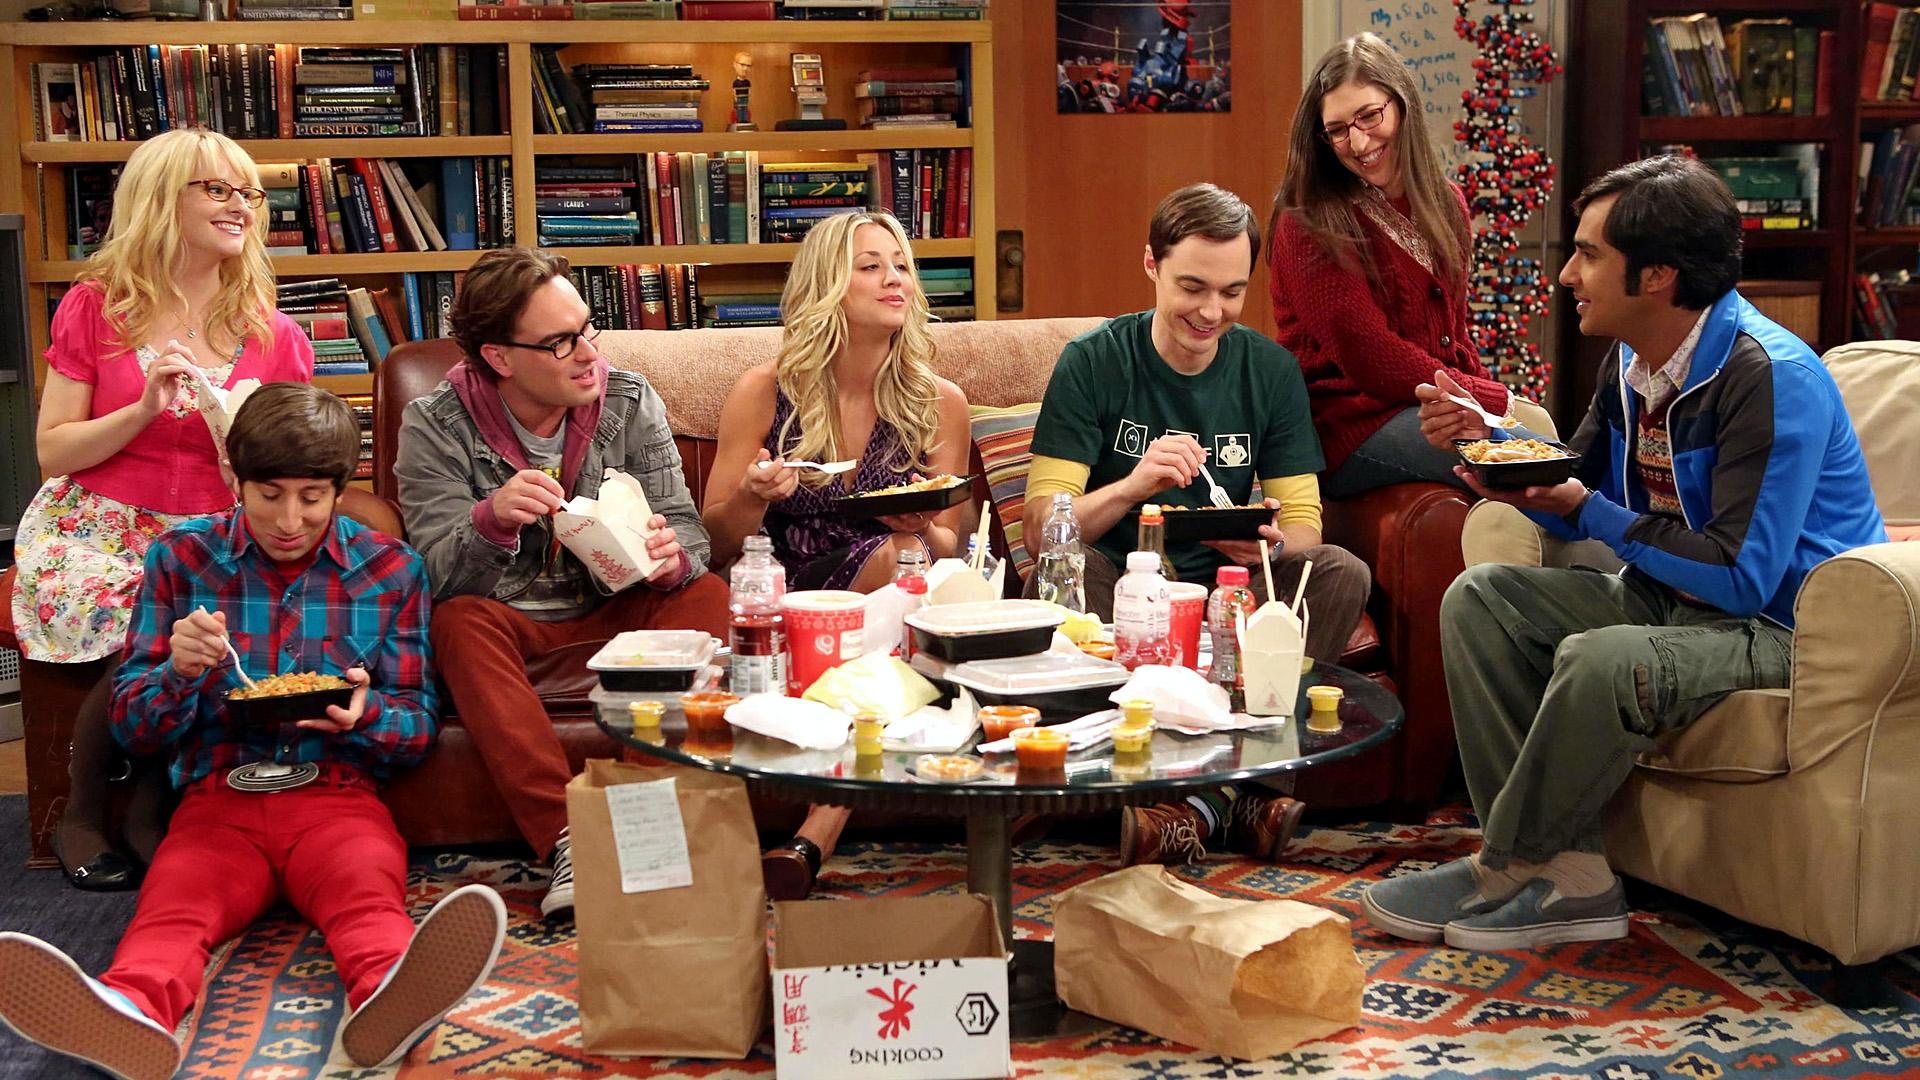 The Conference Valuation. The Big Bang Theory